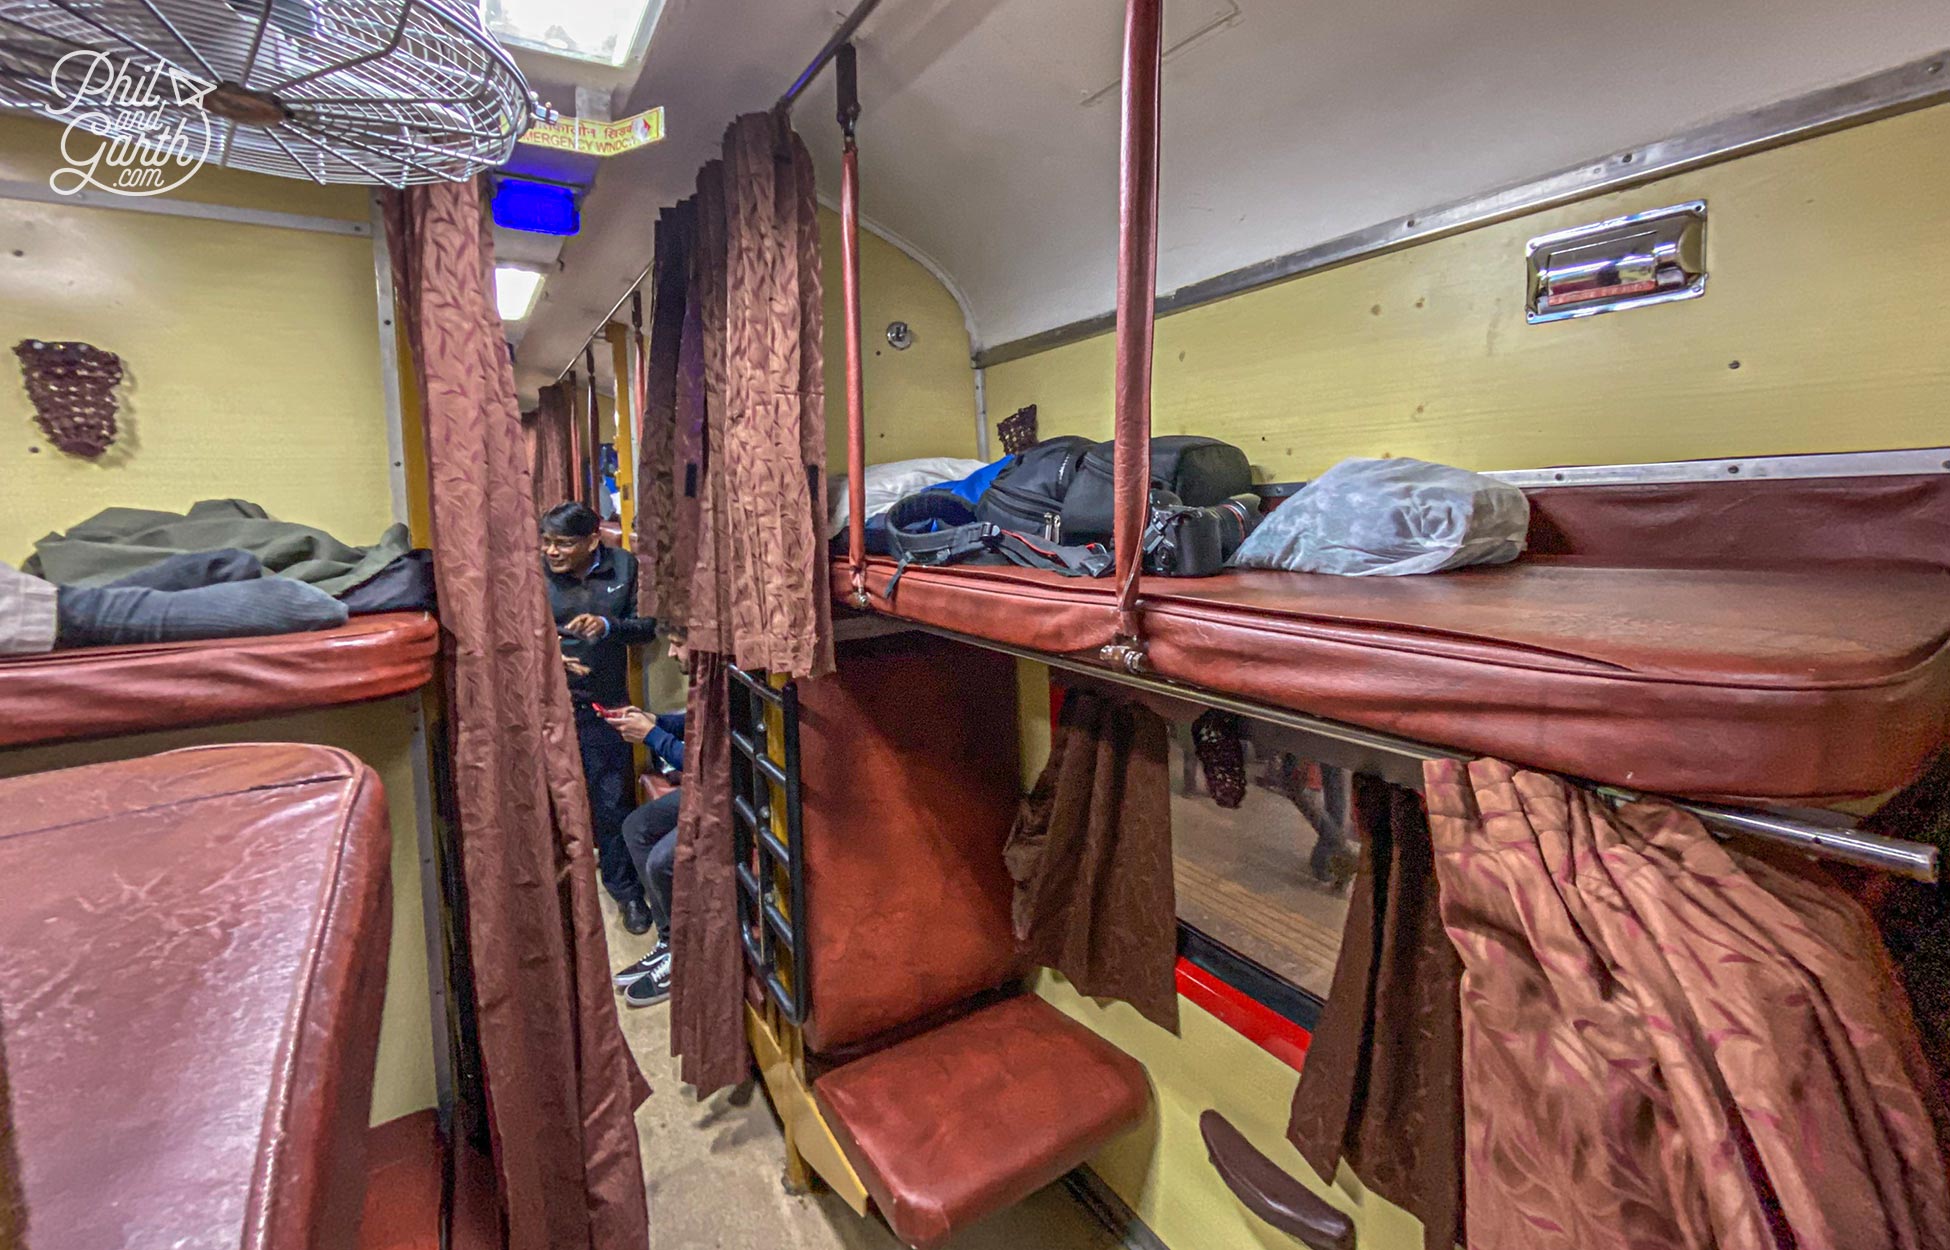 Here's what the AC2 2-berth beds look like on the opposite side along the corridor